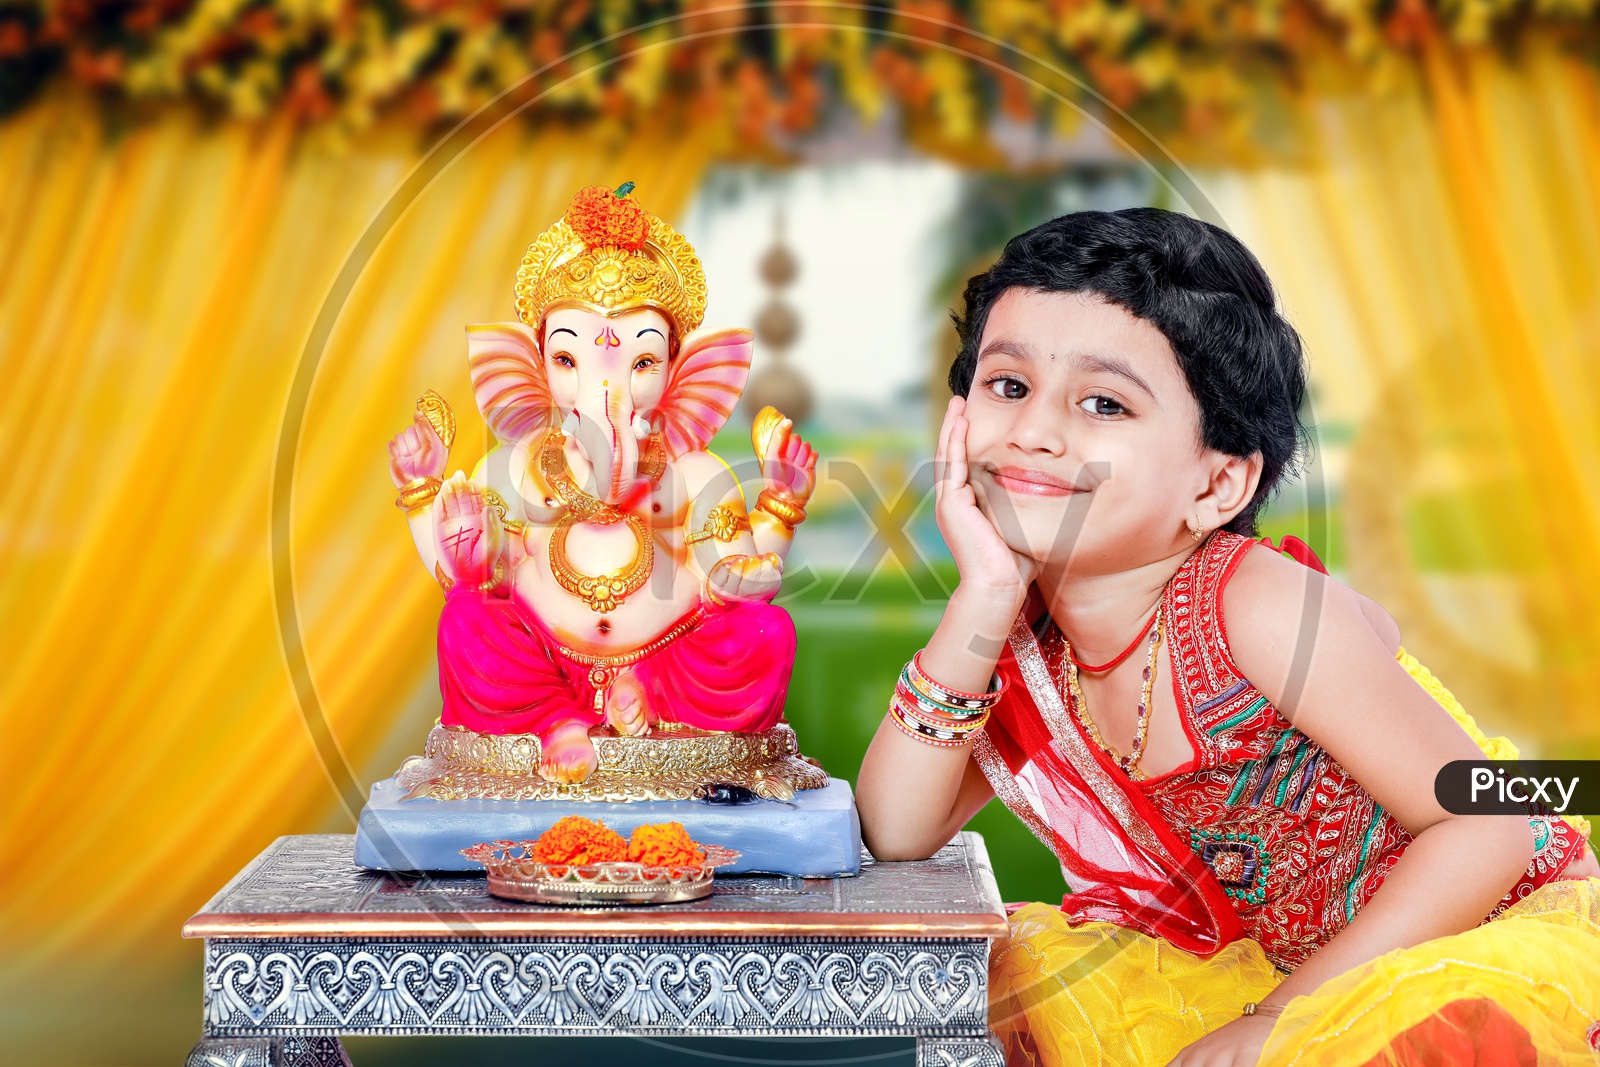 Indian Girl Child With Lord Ganesh Statue